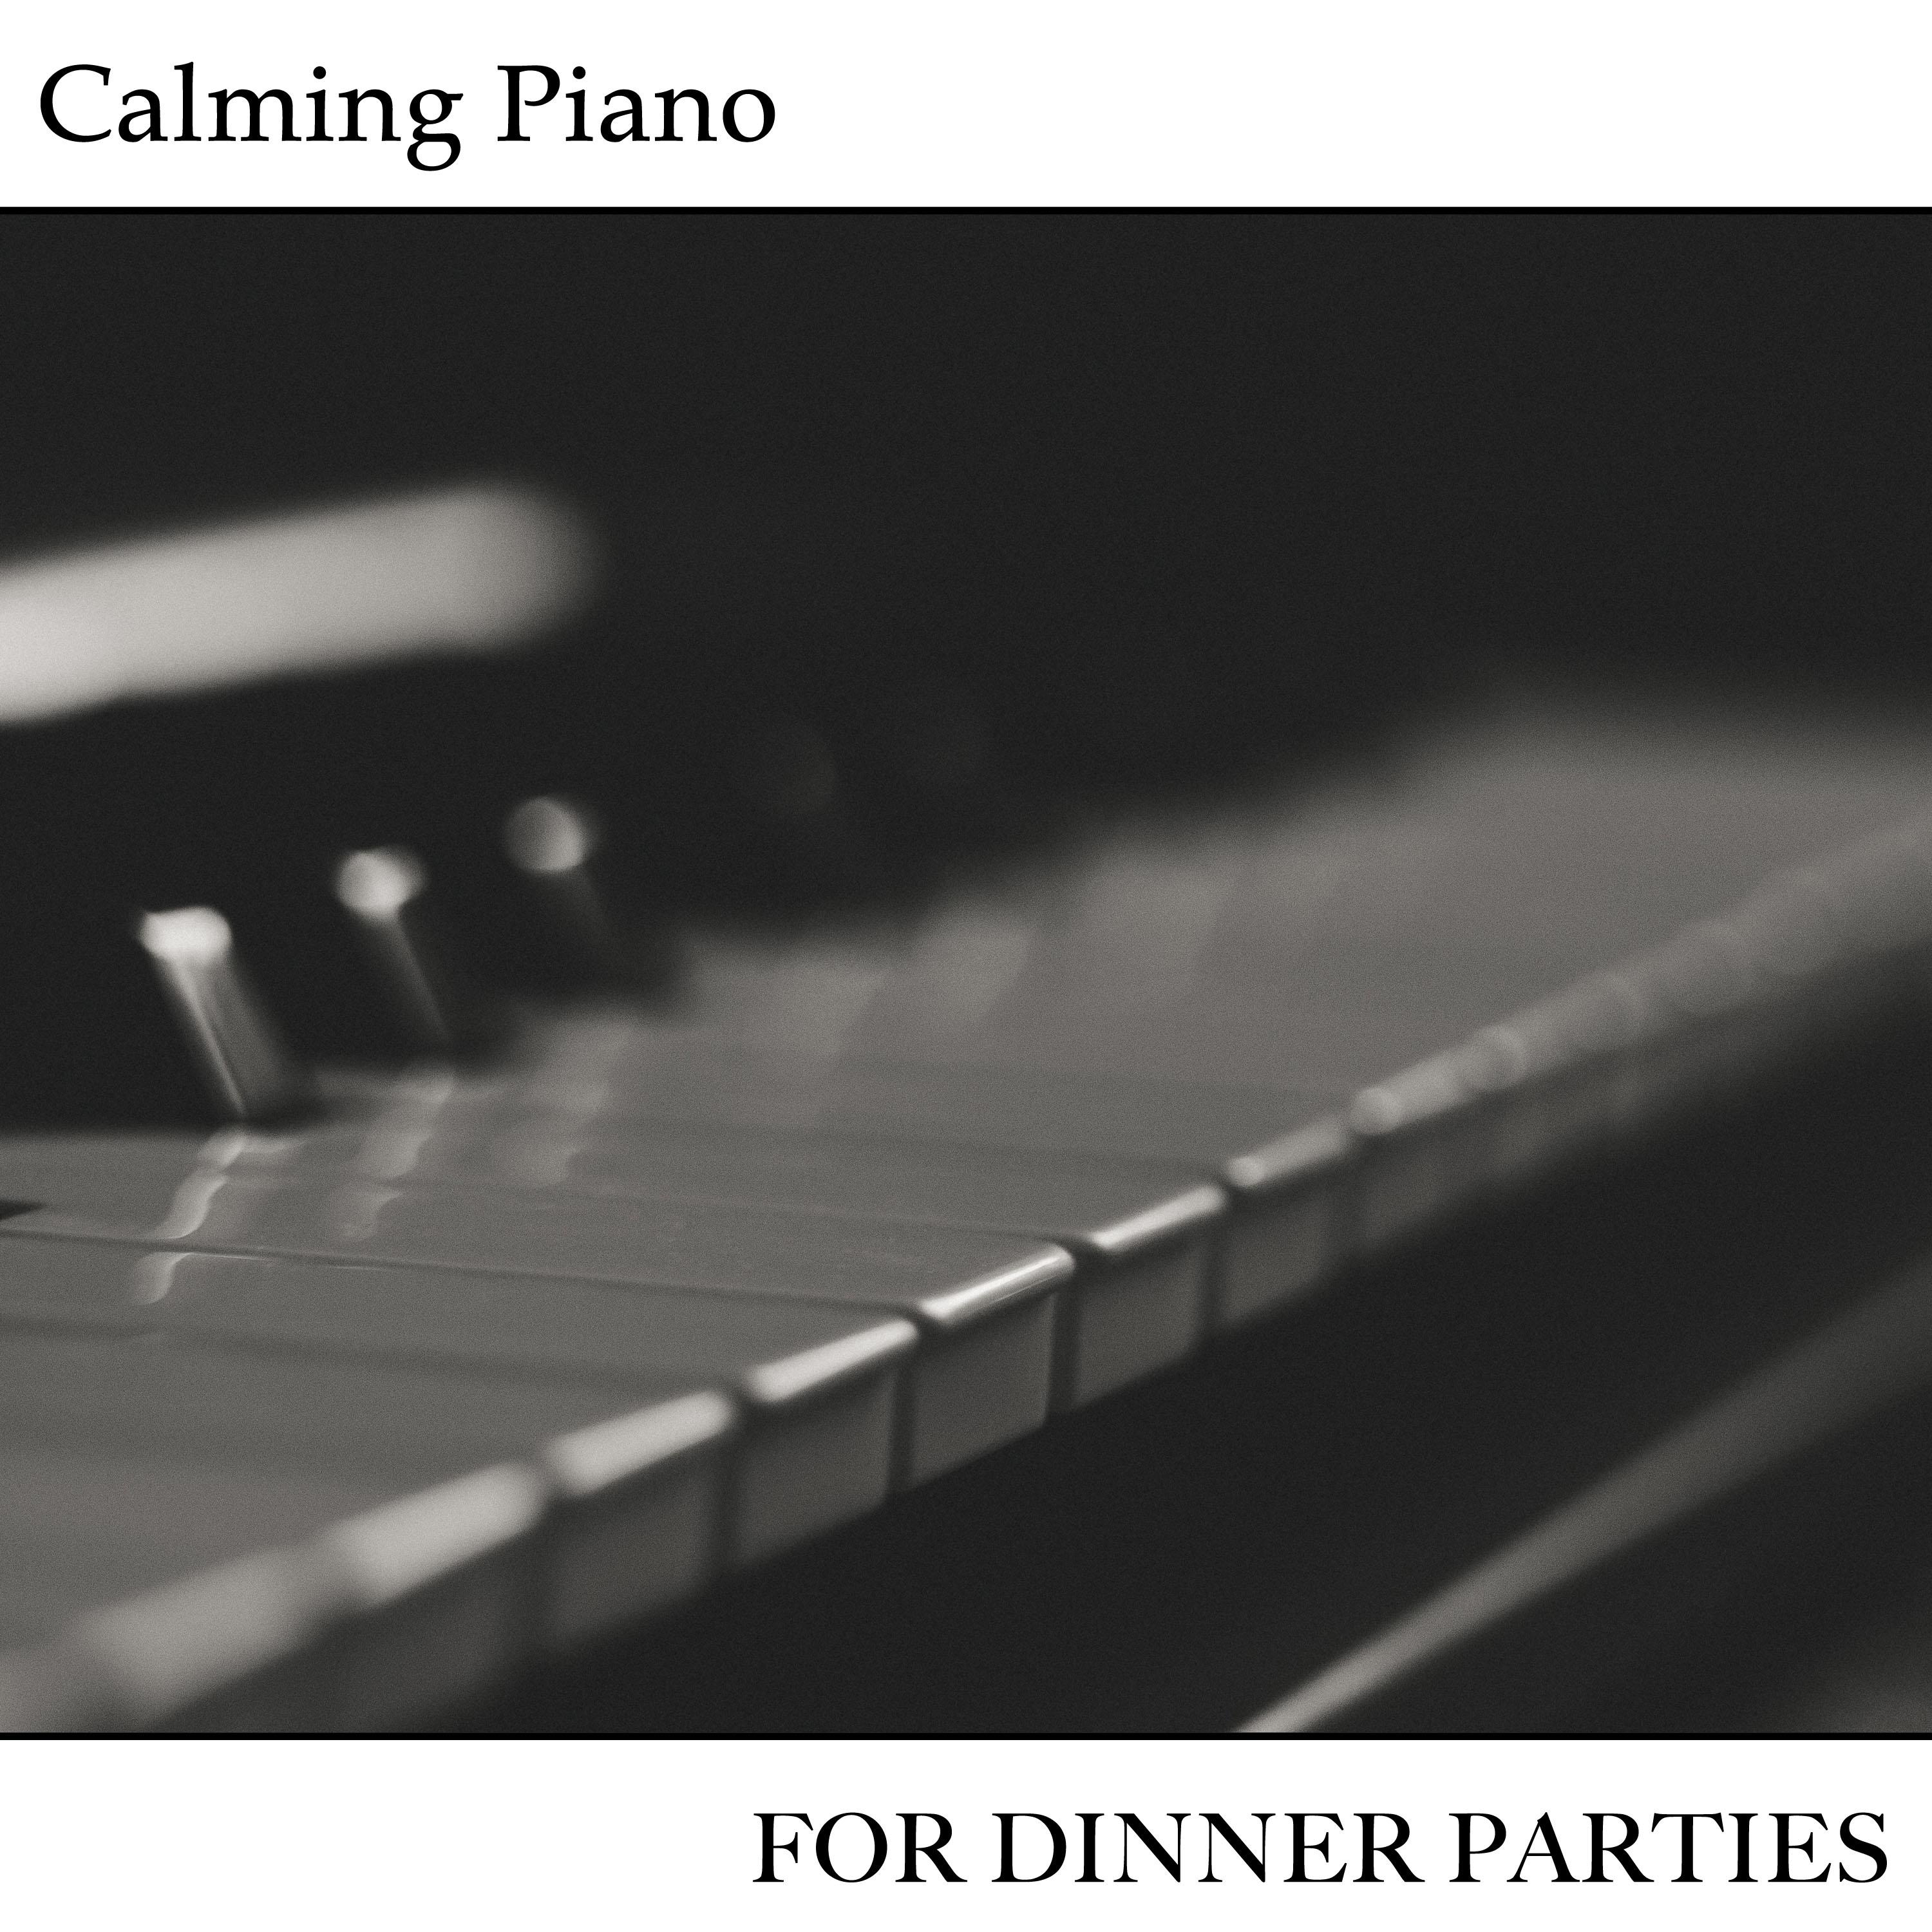 14 Calming Piano Songs for Dinner Parties